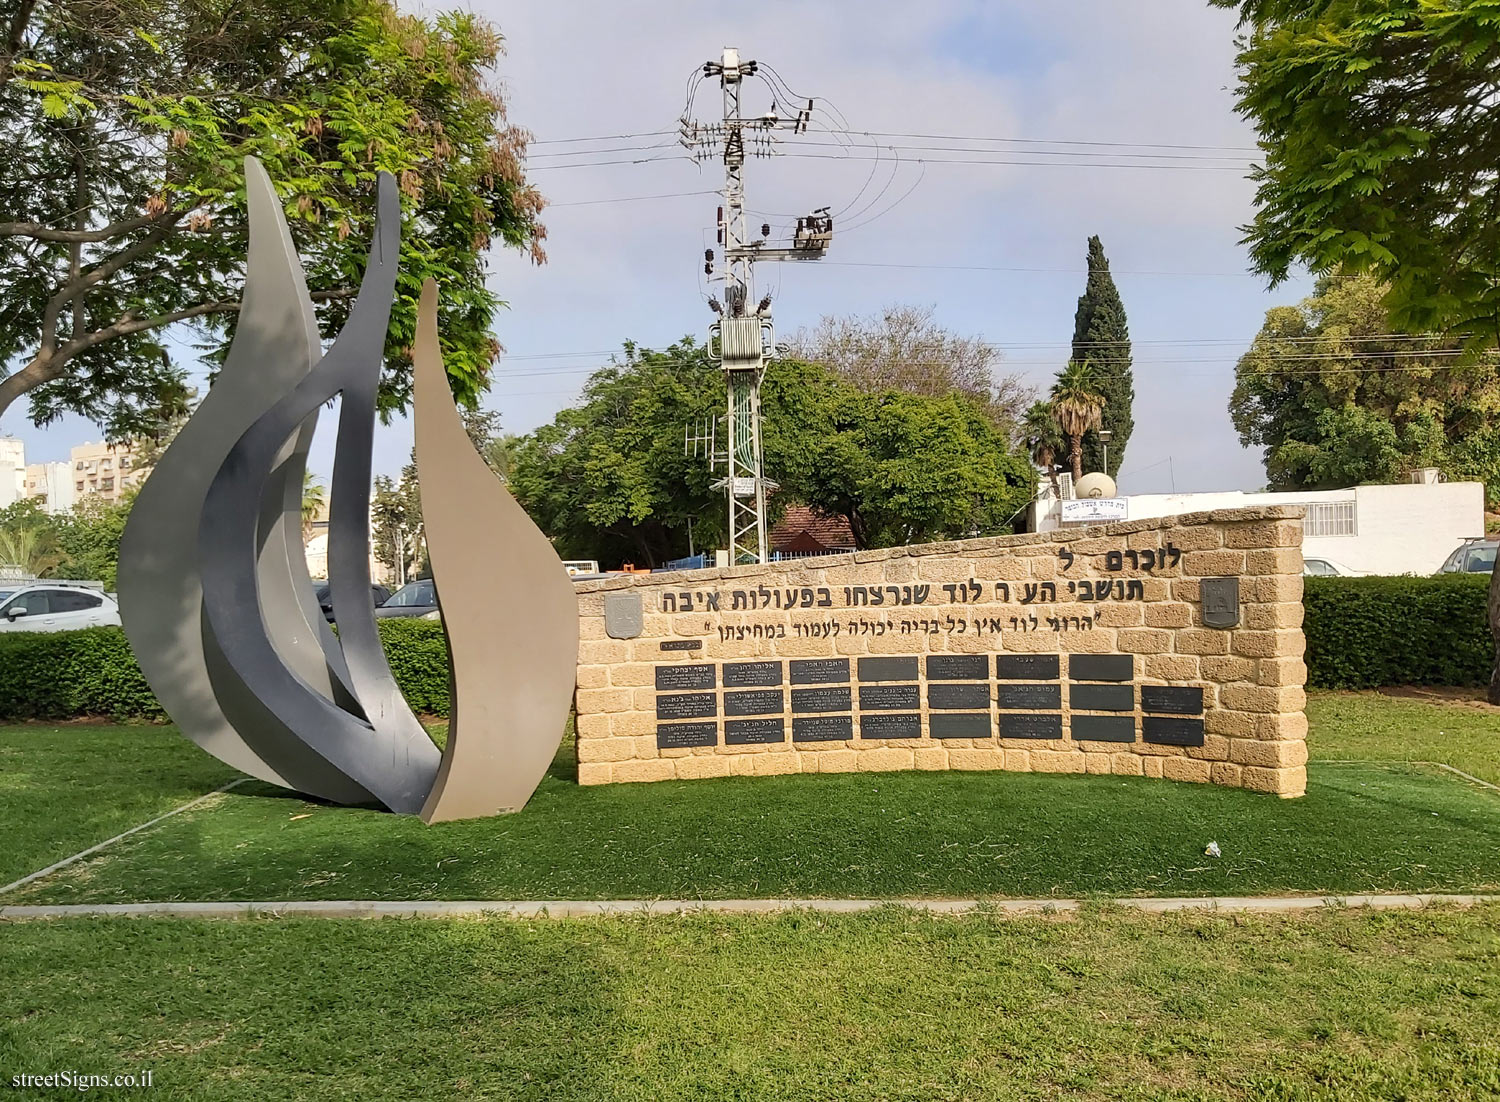 Lod - Monument commemorating the residents of Lod who were killed in hostilities - Katzenelson St 19, Lod, Israel